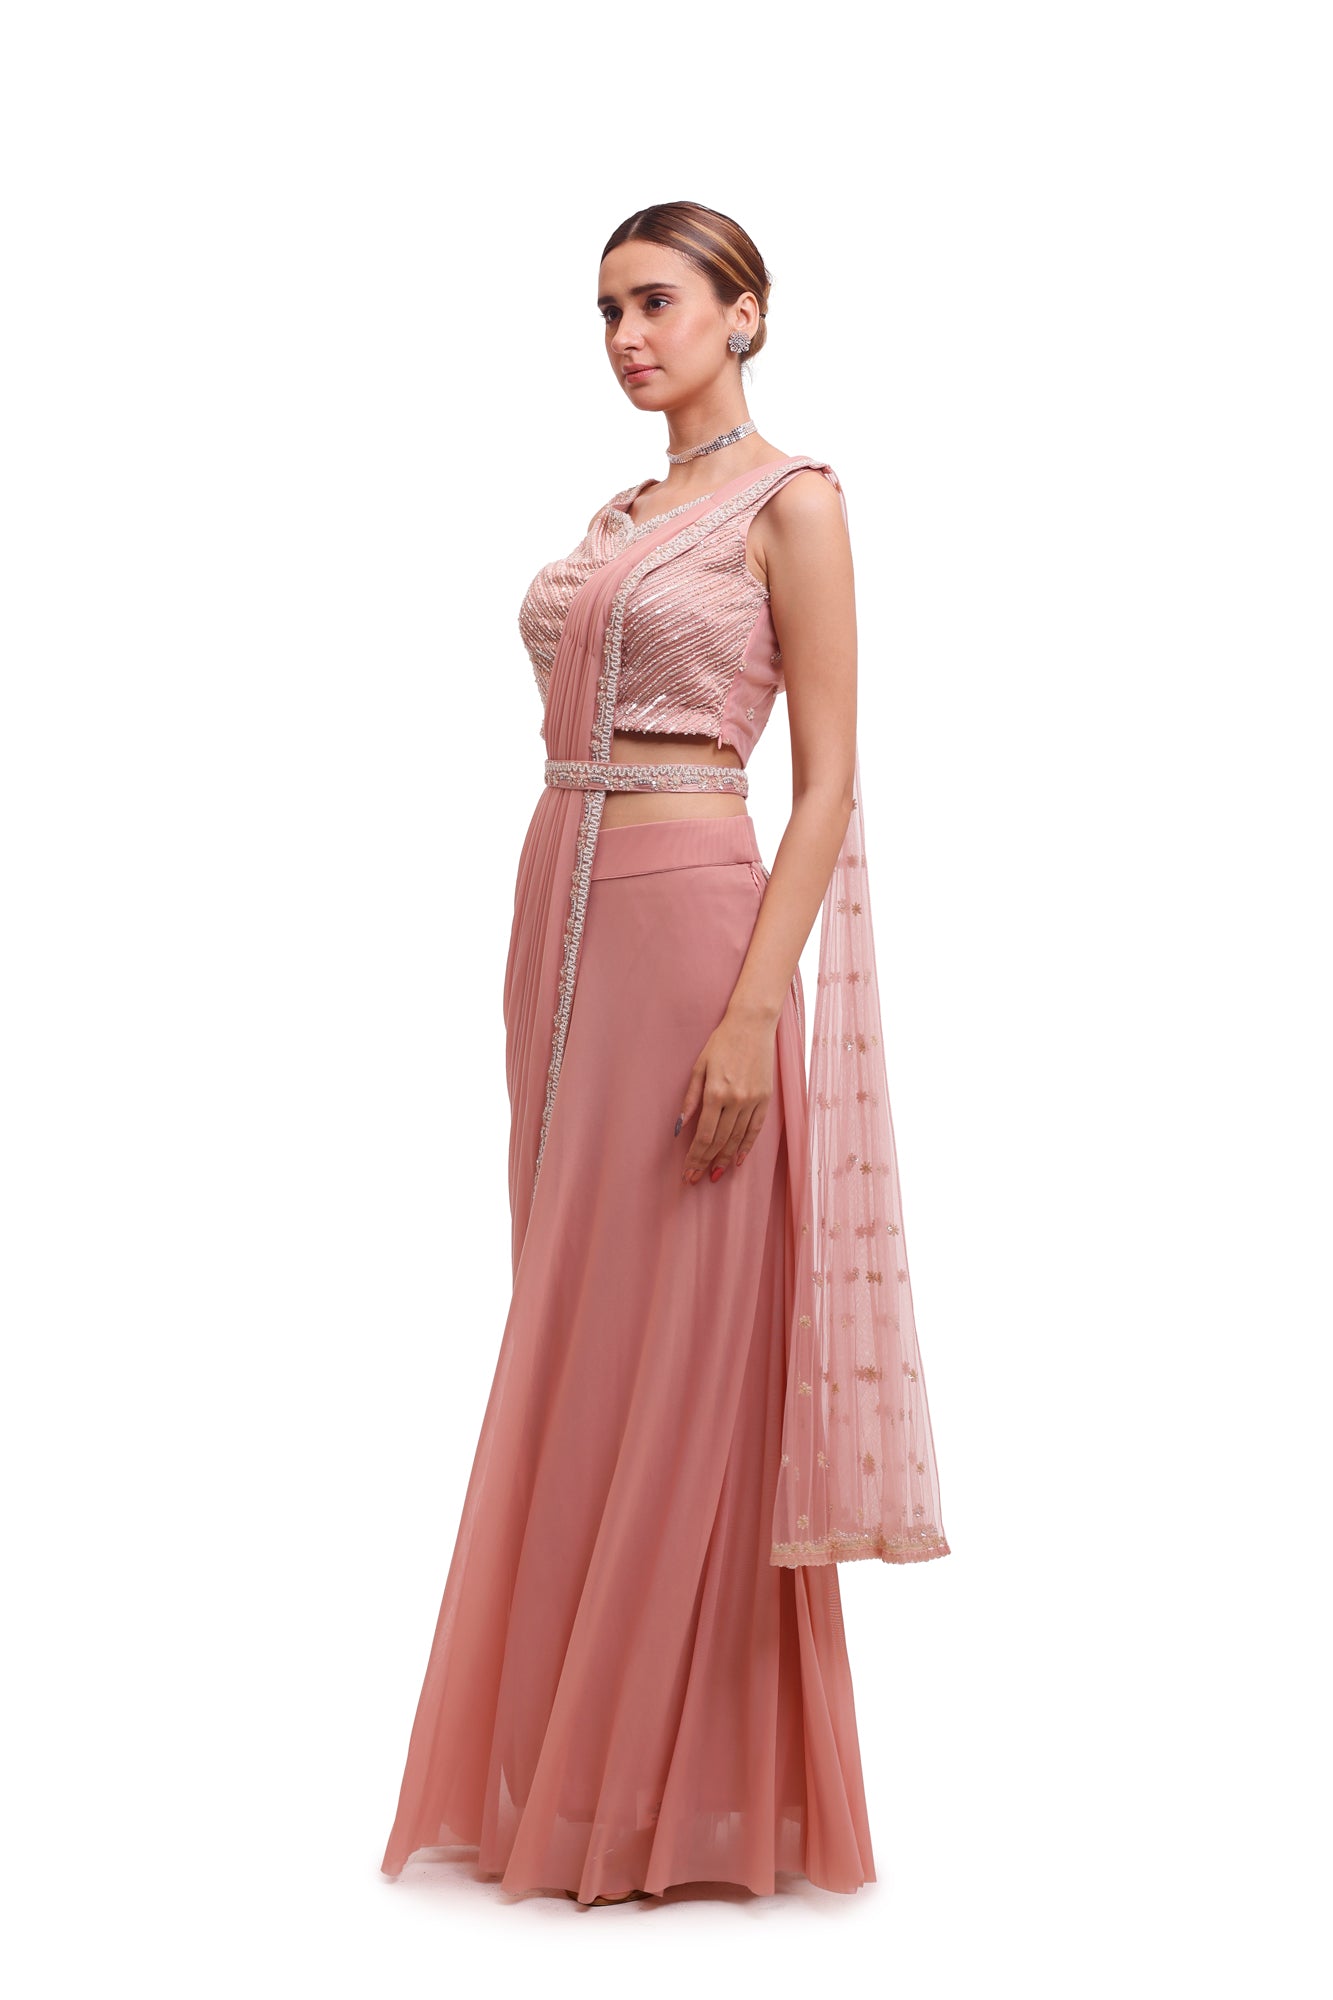 Buy stunning light pink draped lycra saree online in USA with embellished blouse. Look your best at parties and weddings in beautiful designer sarees, embroidered sarees, handwoven sarees, silk sarees, organza saris from Pure Elegance Indian saree store in USA.-saree